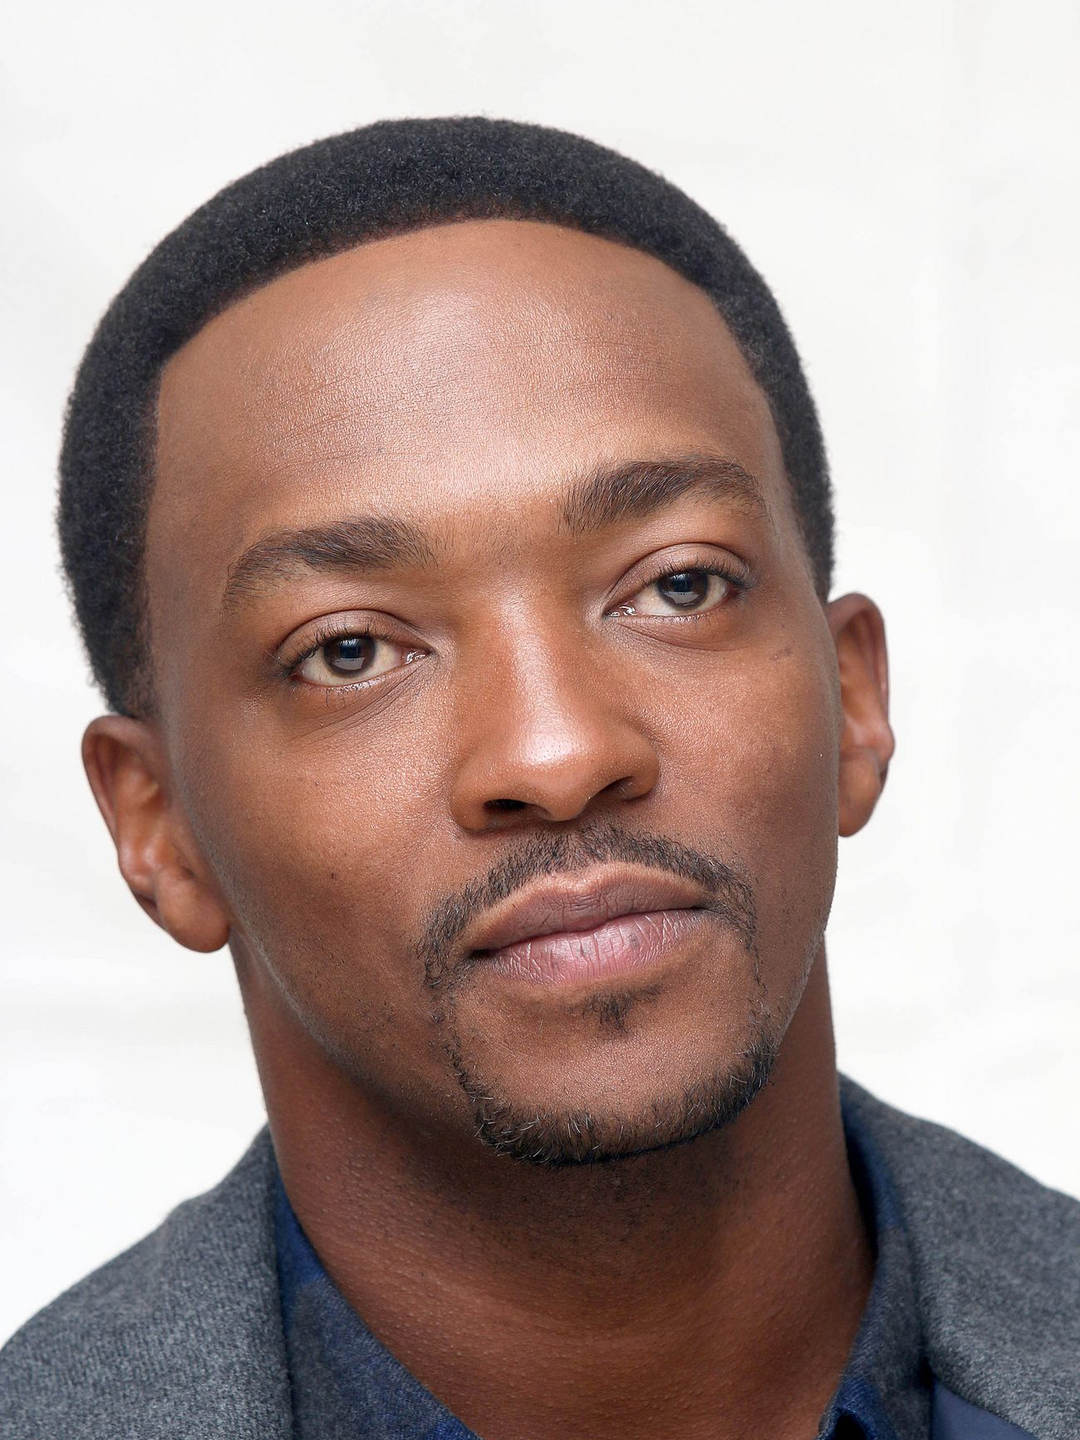 Anthony Mackie who is his mother